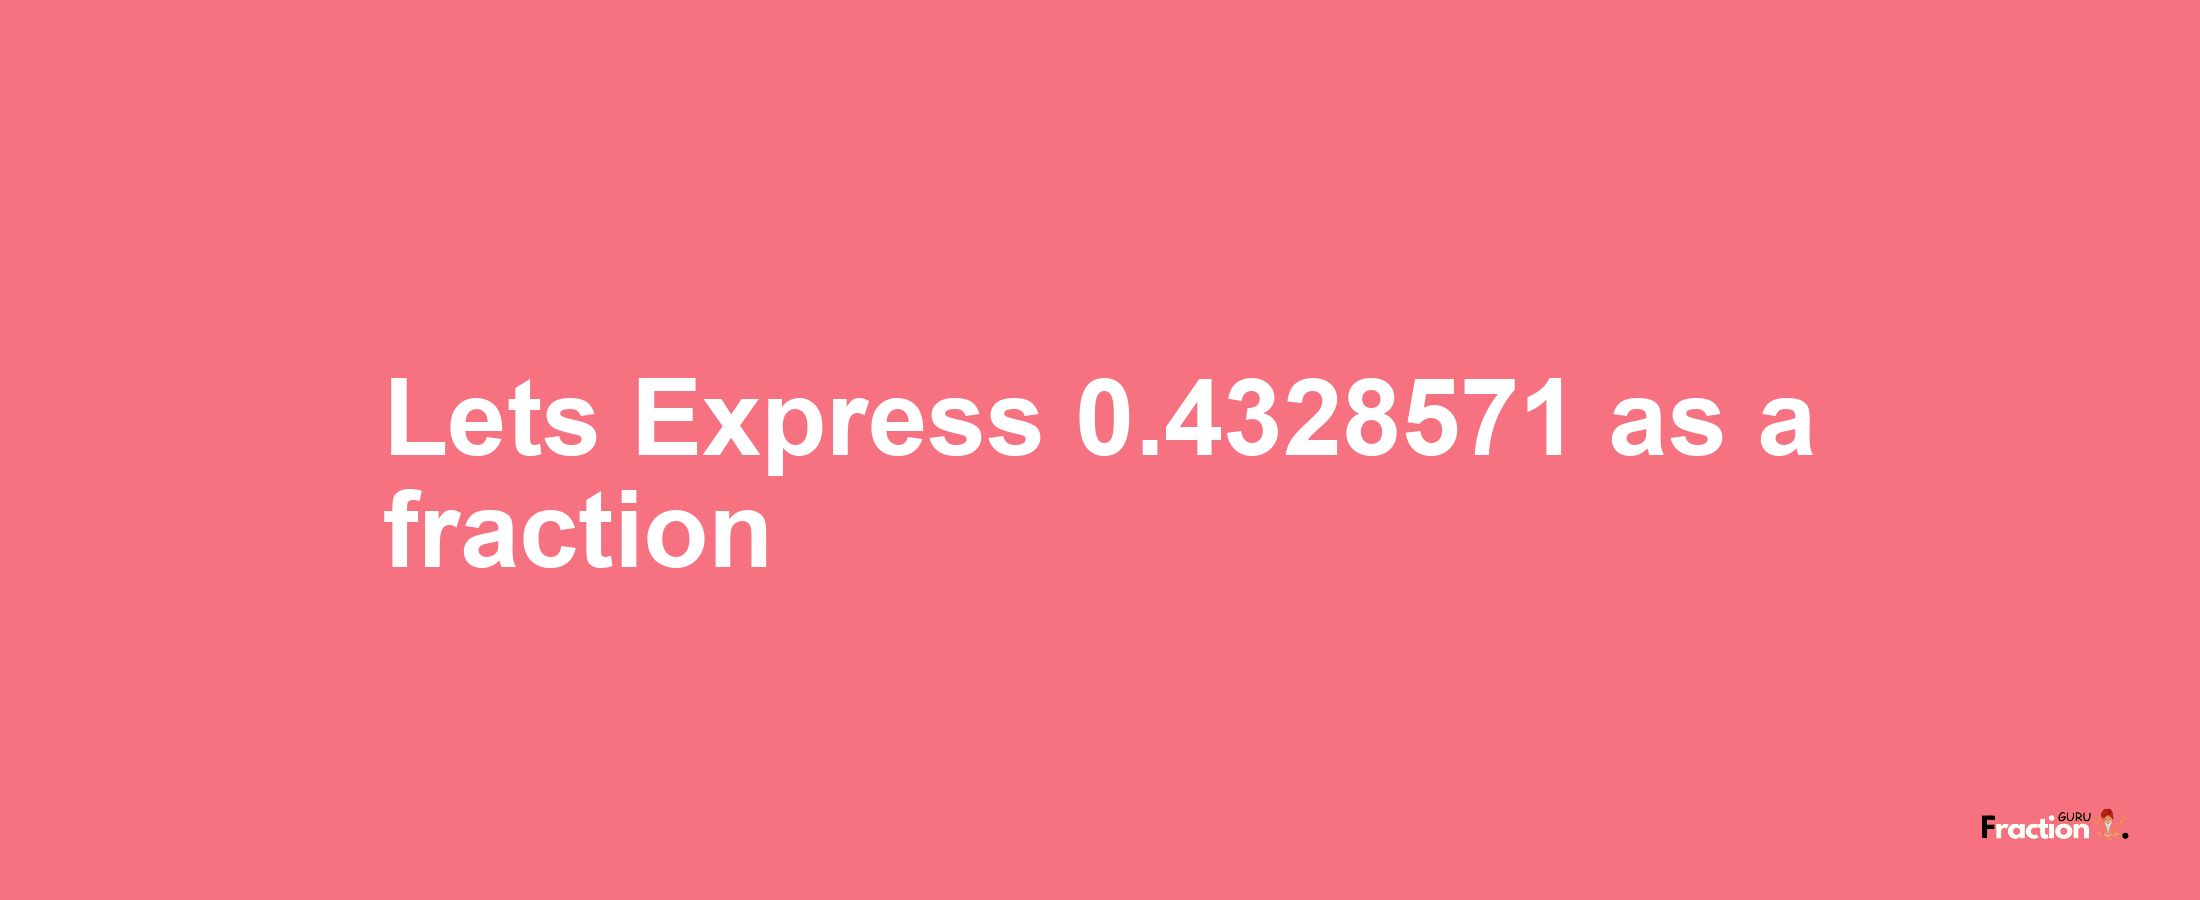 Lets Express 0.4328571 as afraction